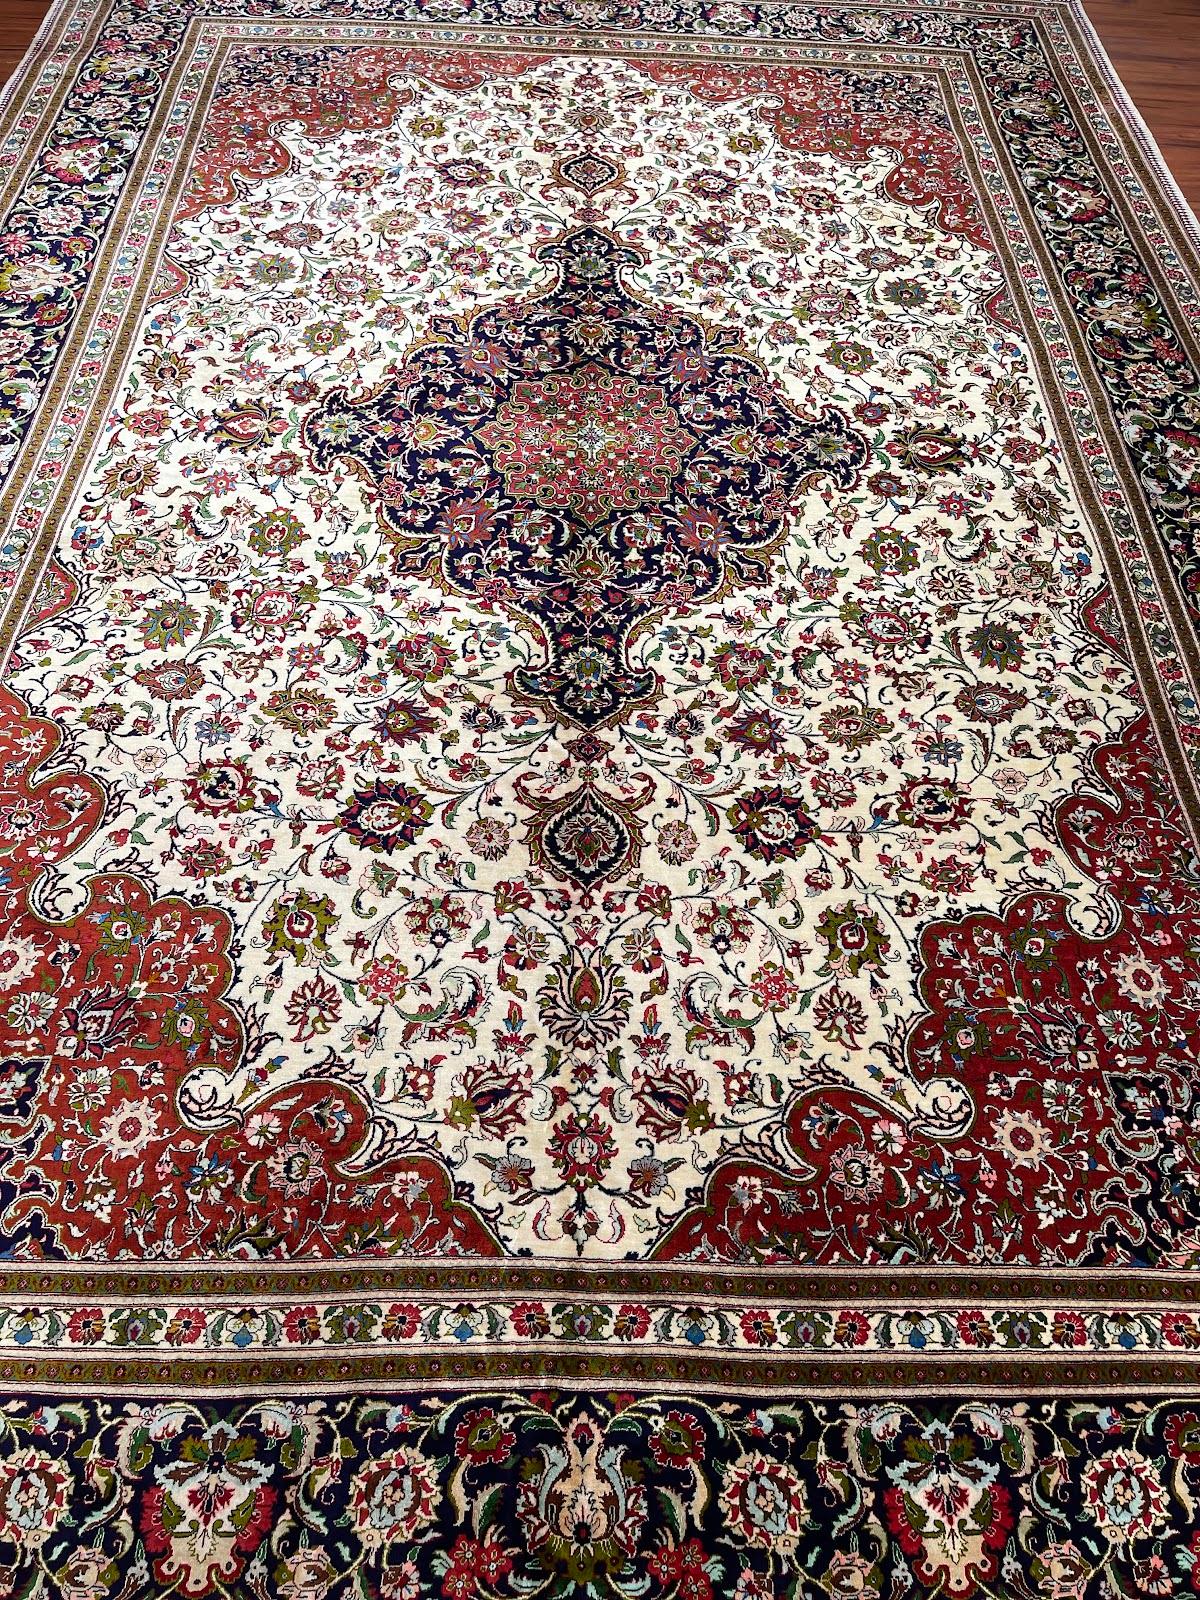 This is a Persian Silk Qum rug originated from iran. The Material is 100% silk. The Dimensions are 8’0”X 11’3” ft. Condition of the item is purely Excellent. Circa (Date of manufacture) 20th century.
 